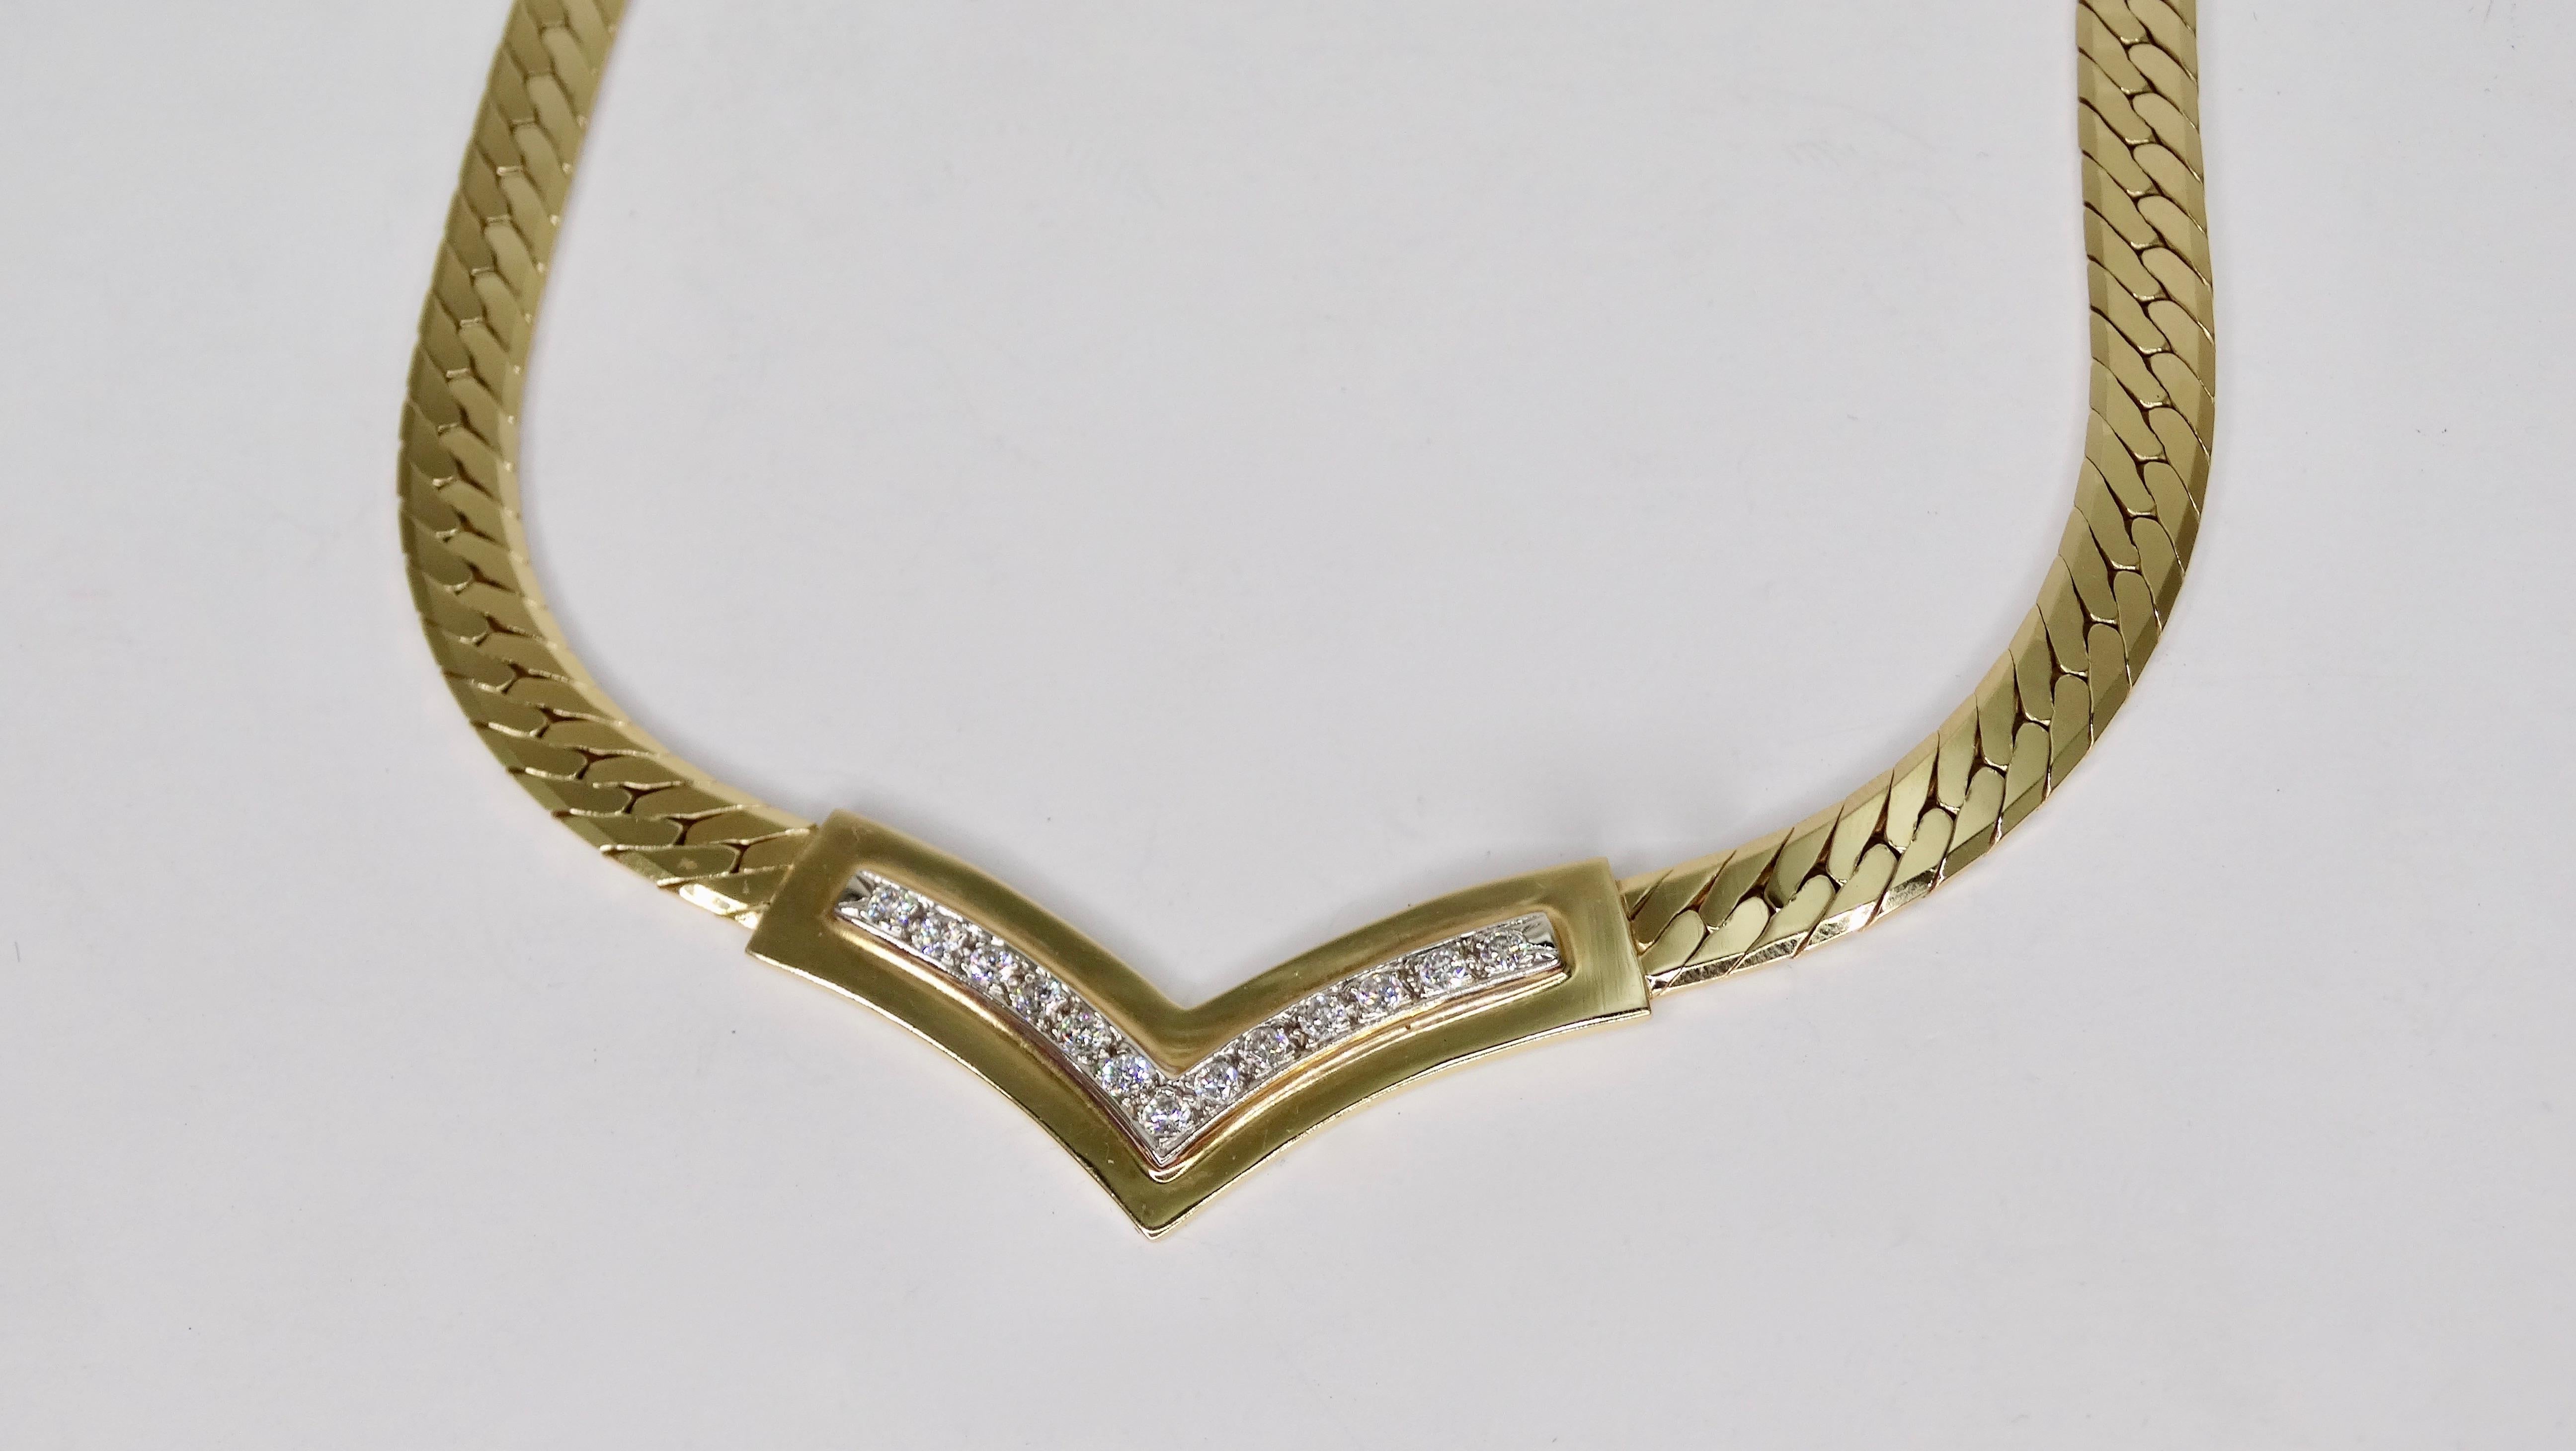 Gorgeous 14k gold necklace with a cuban link chain and decorative v-shaped pedant with 13 Diamonds. Stamped 14k and weighs 42.03g. Perfect to wear for a night out with your favorite vintage Gucci dress or layered up with your vintage concert tees.